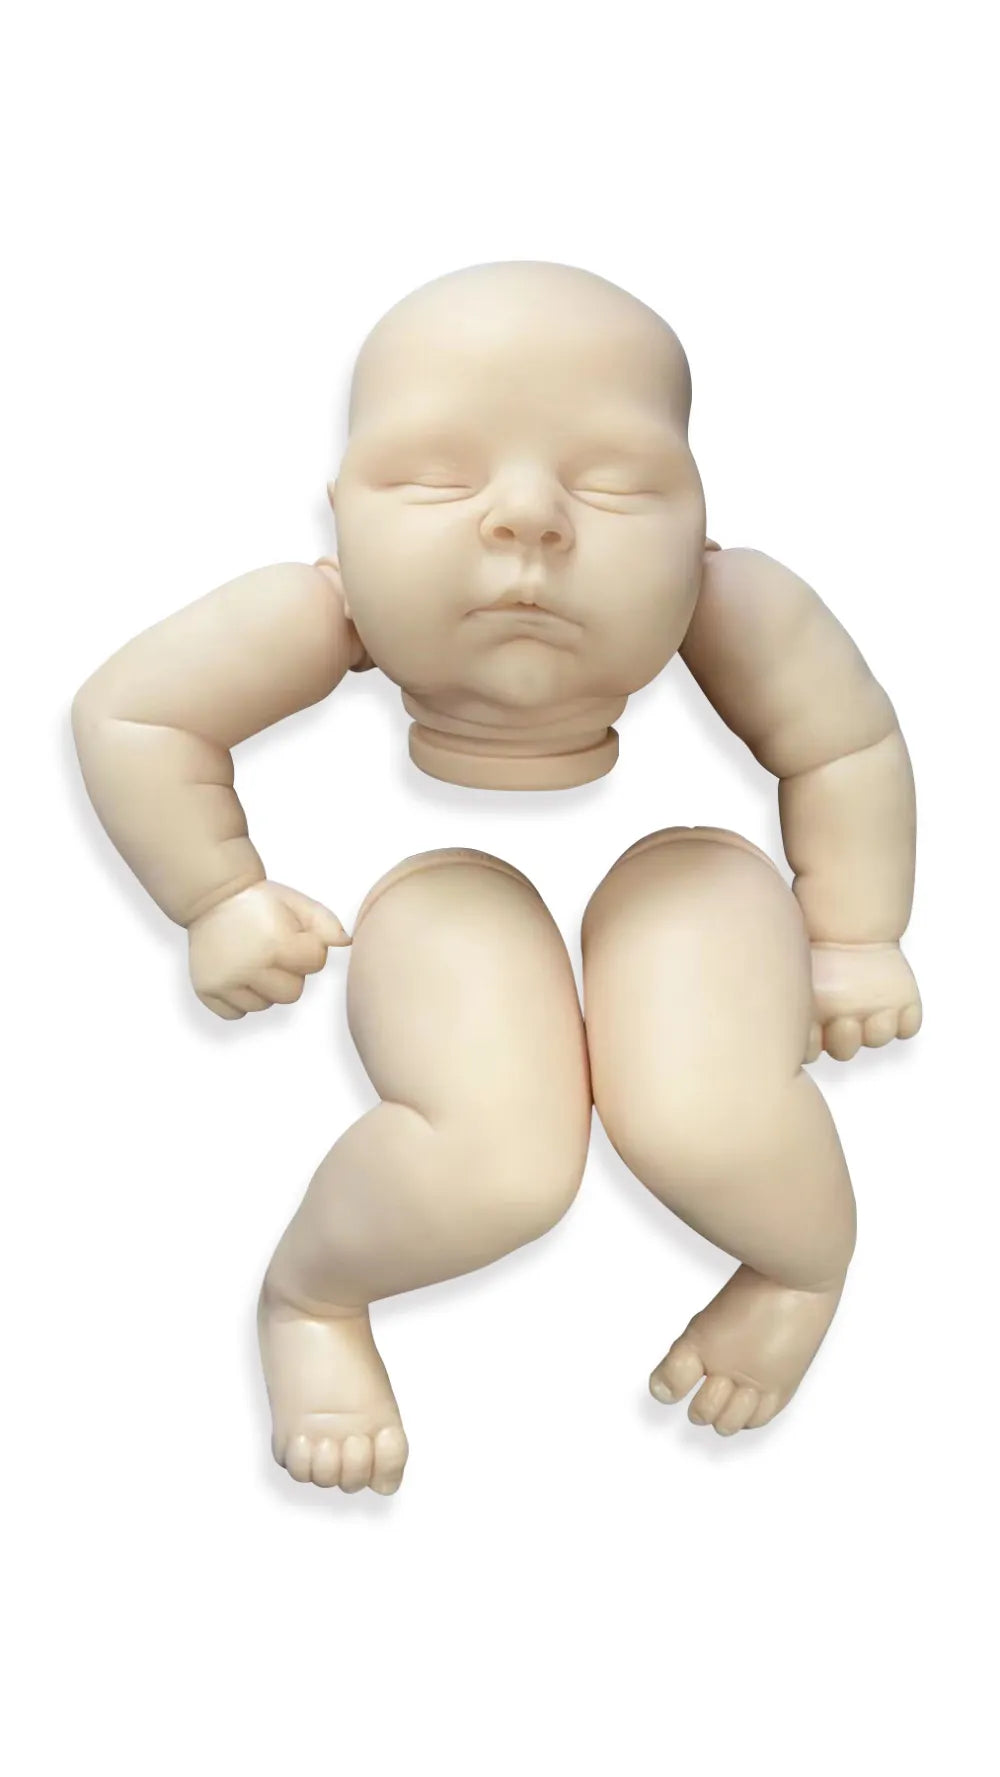 21-Inch Unpainted DIY Reborn Doll Kit with Cloth Body and Peaches Fresh Color